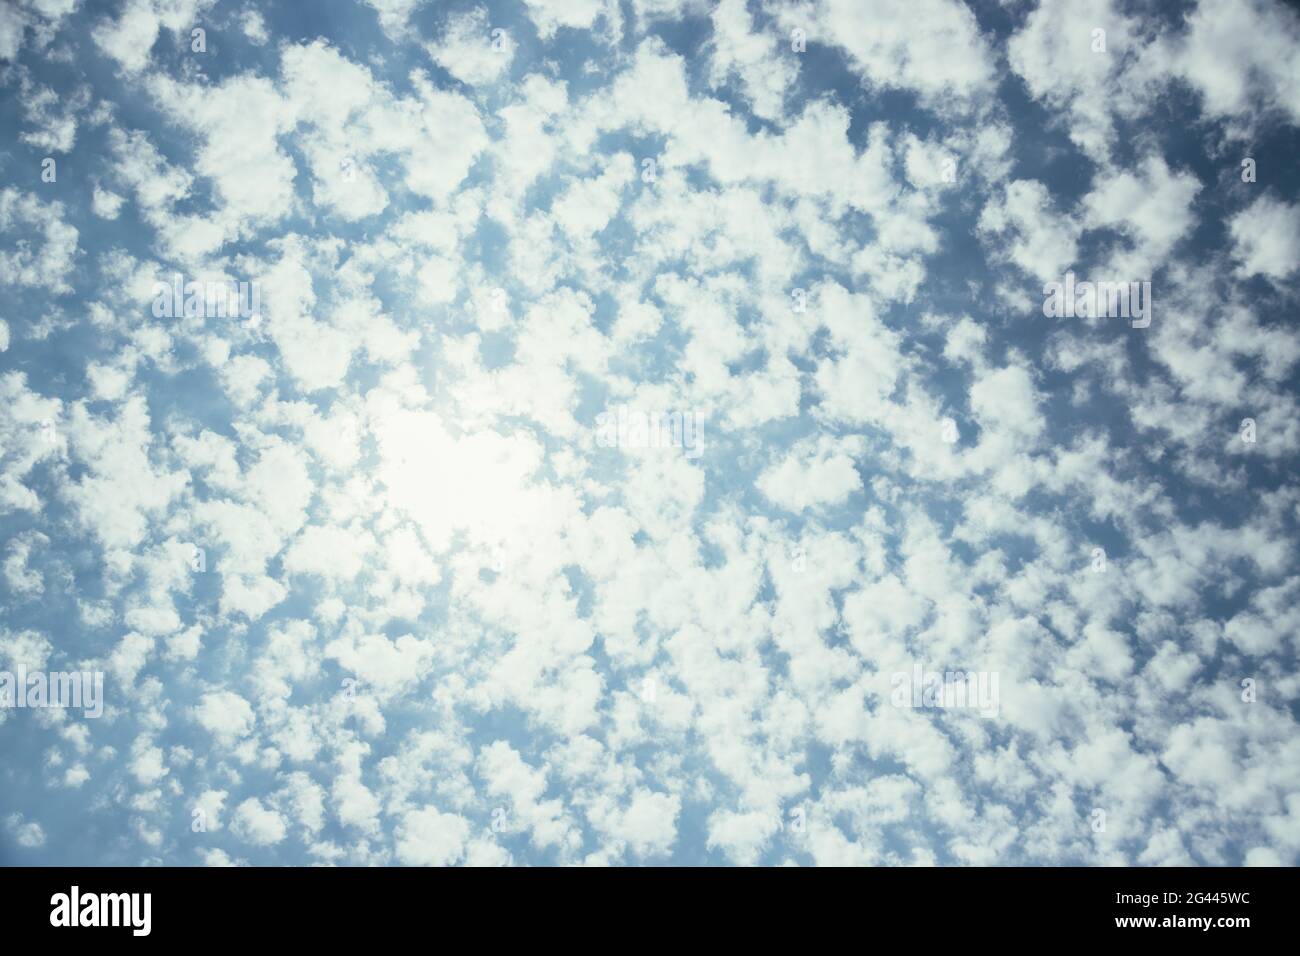 Environment concept: Small airy clouds on blue sky Stock Photo